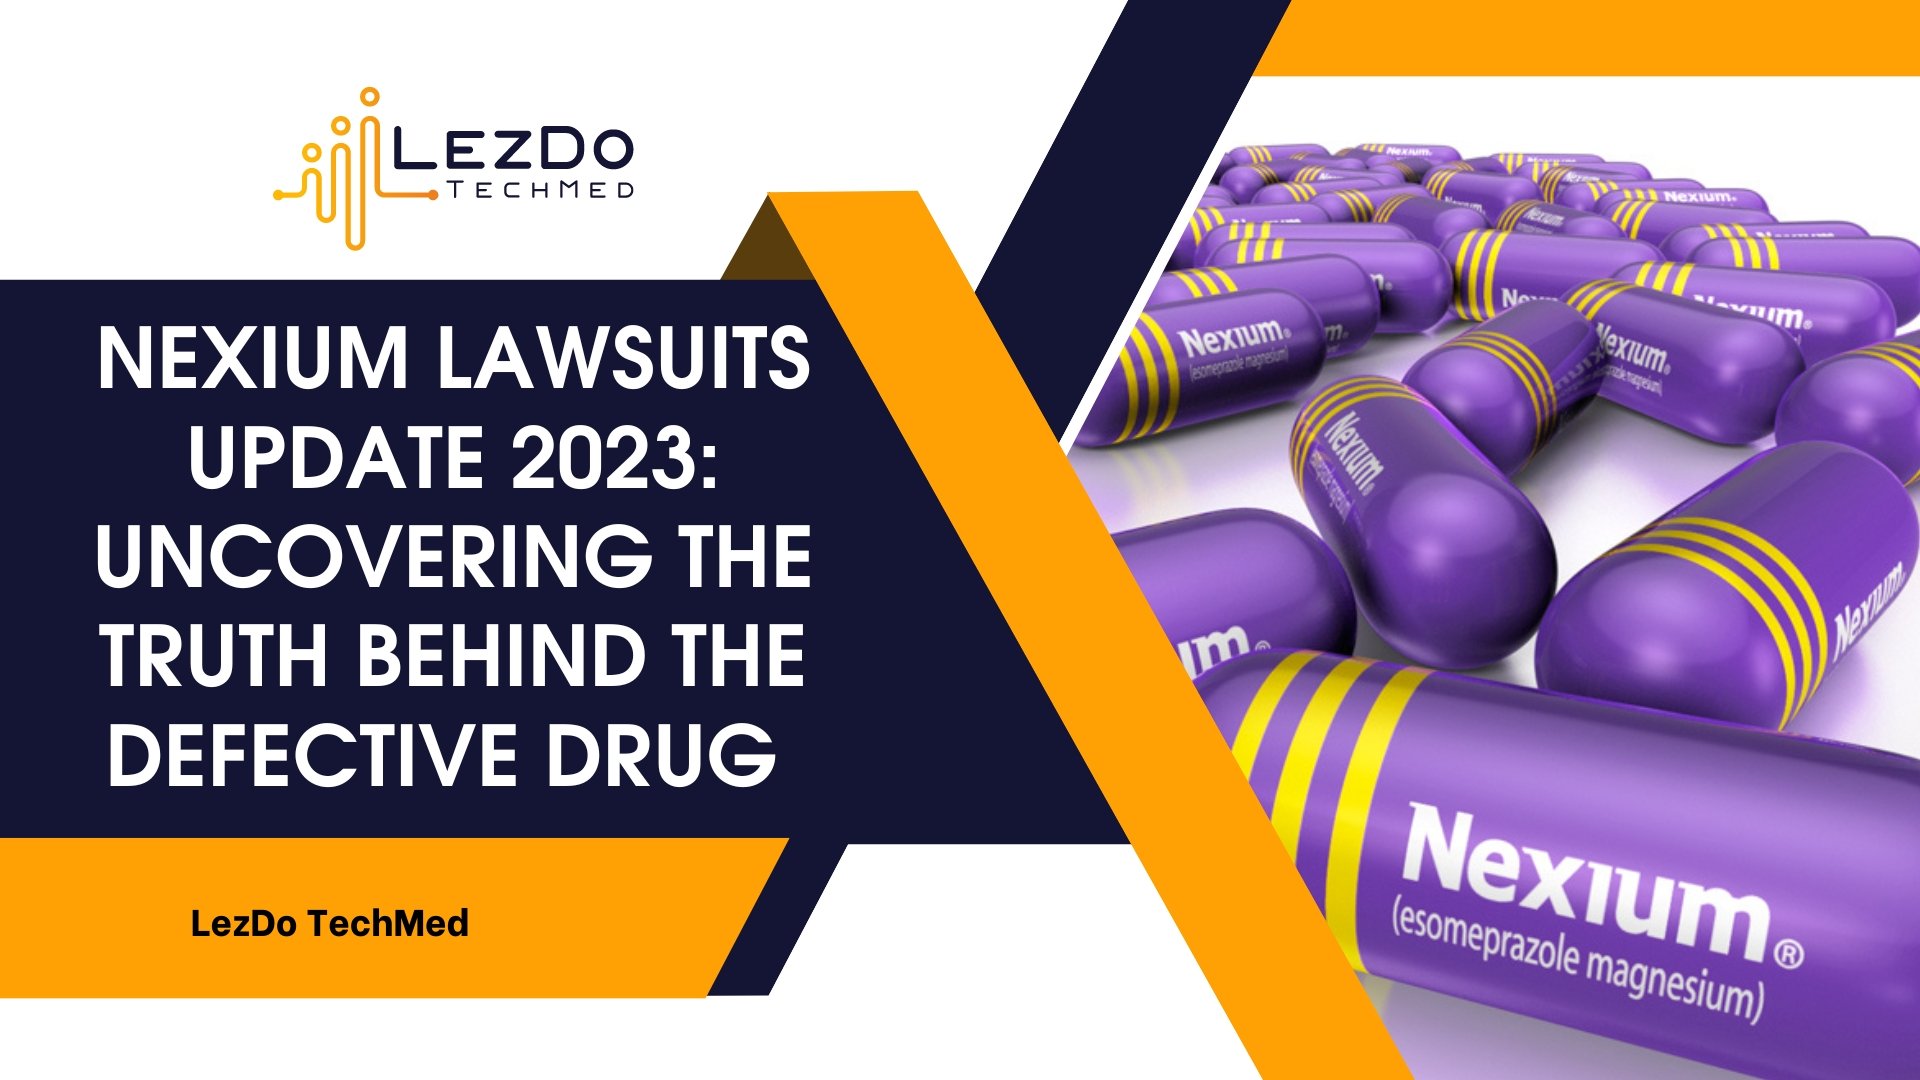 Nexium Lawsuits Update 2023: Uncovering the Truth Behind the Defective Drug